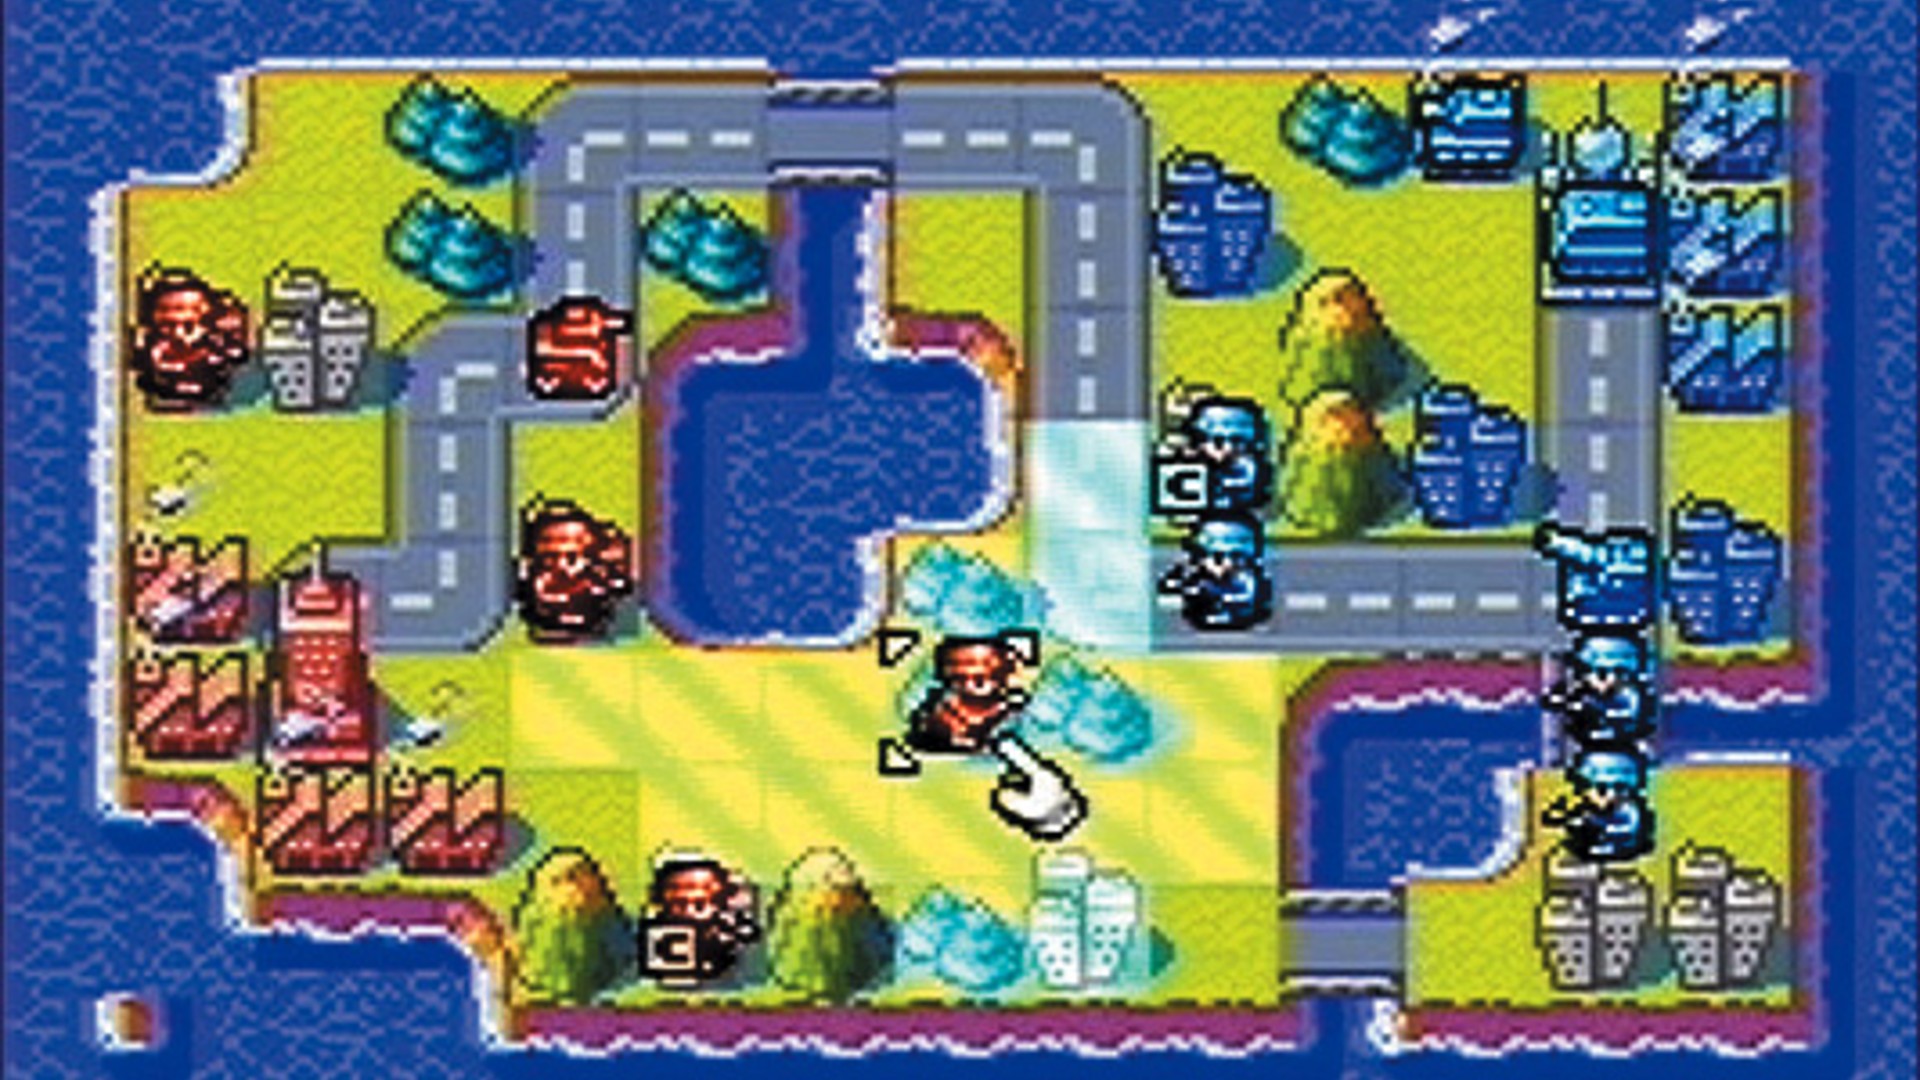 Want an Advance Wars game? these | PCGamesN